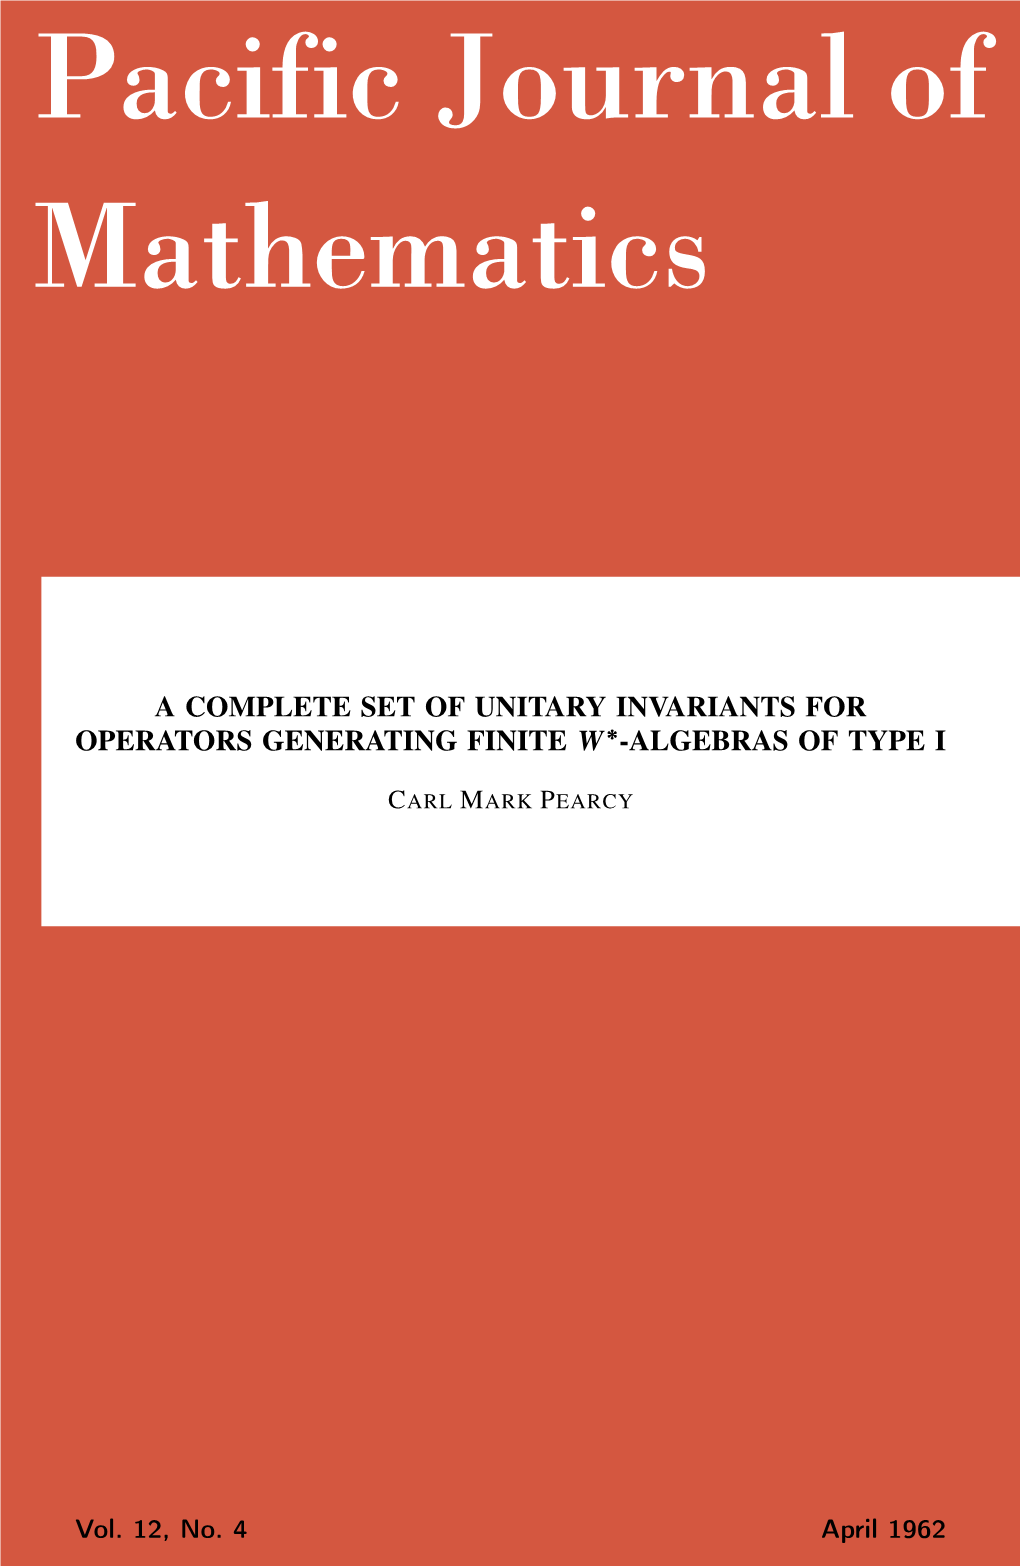 A Complete Set of Unitary Invariants for Operators Generating Finite W ∗-Algebras of Type I